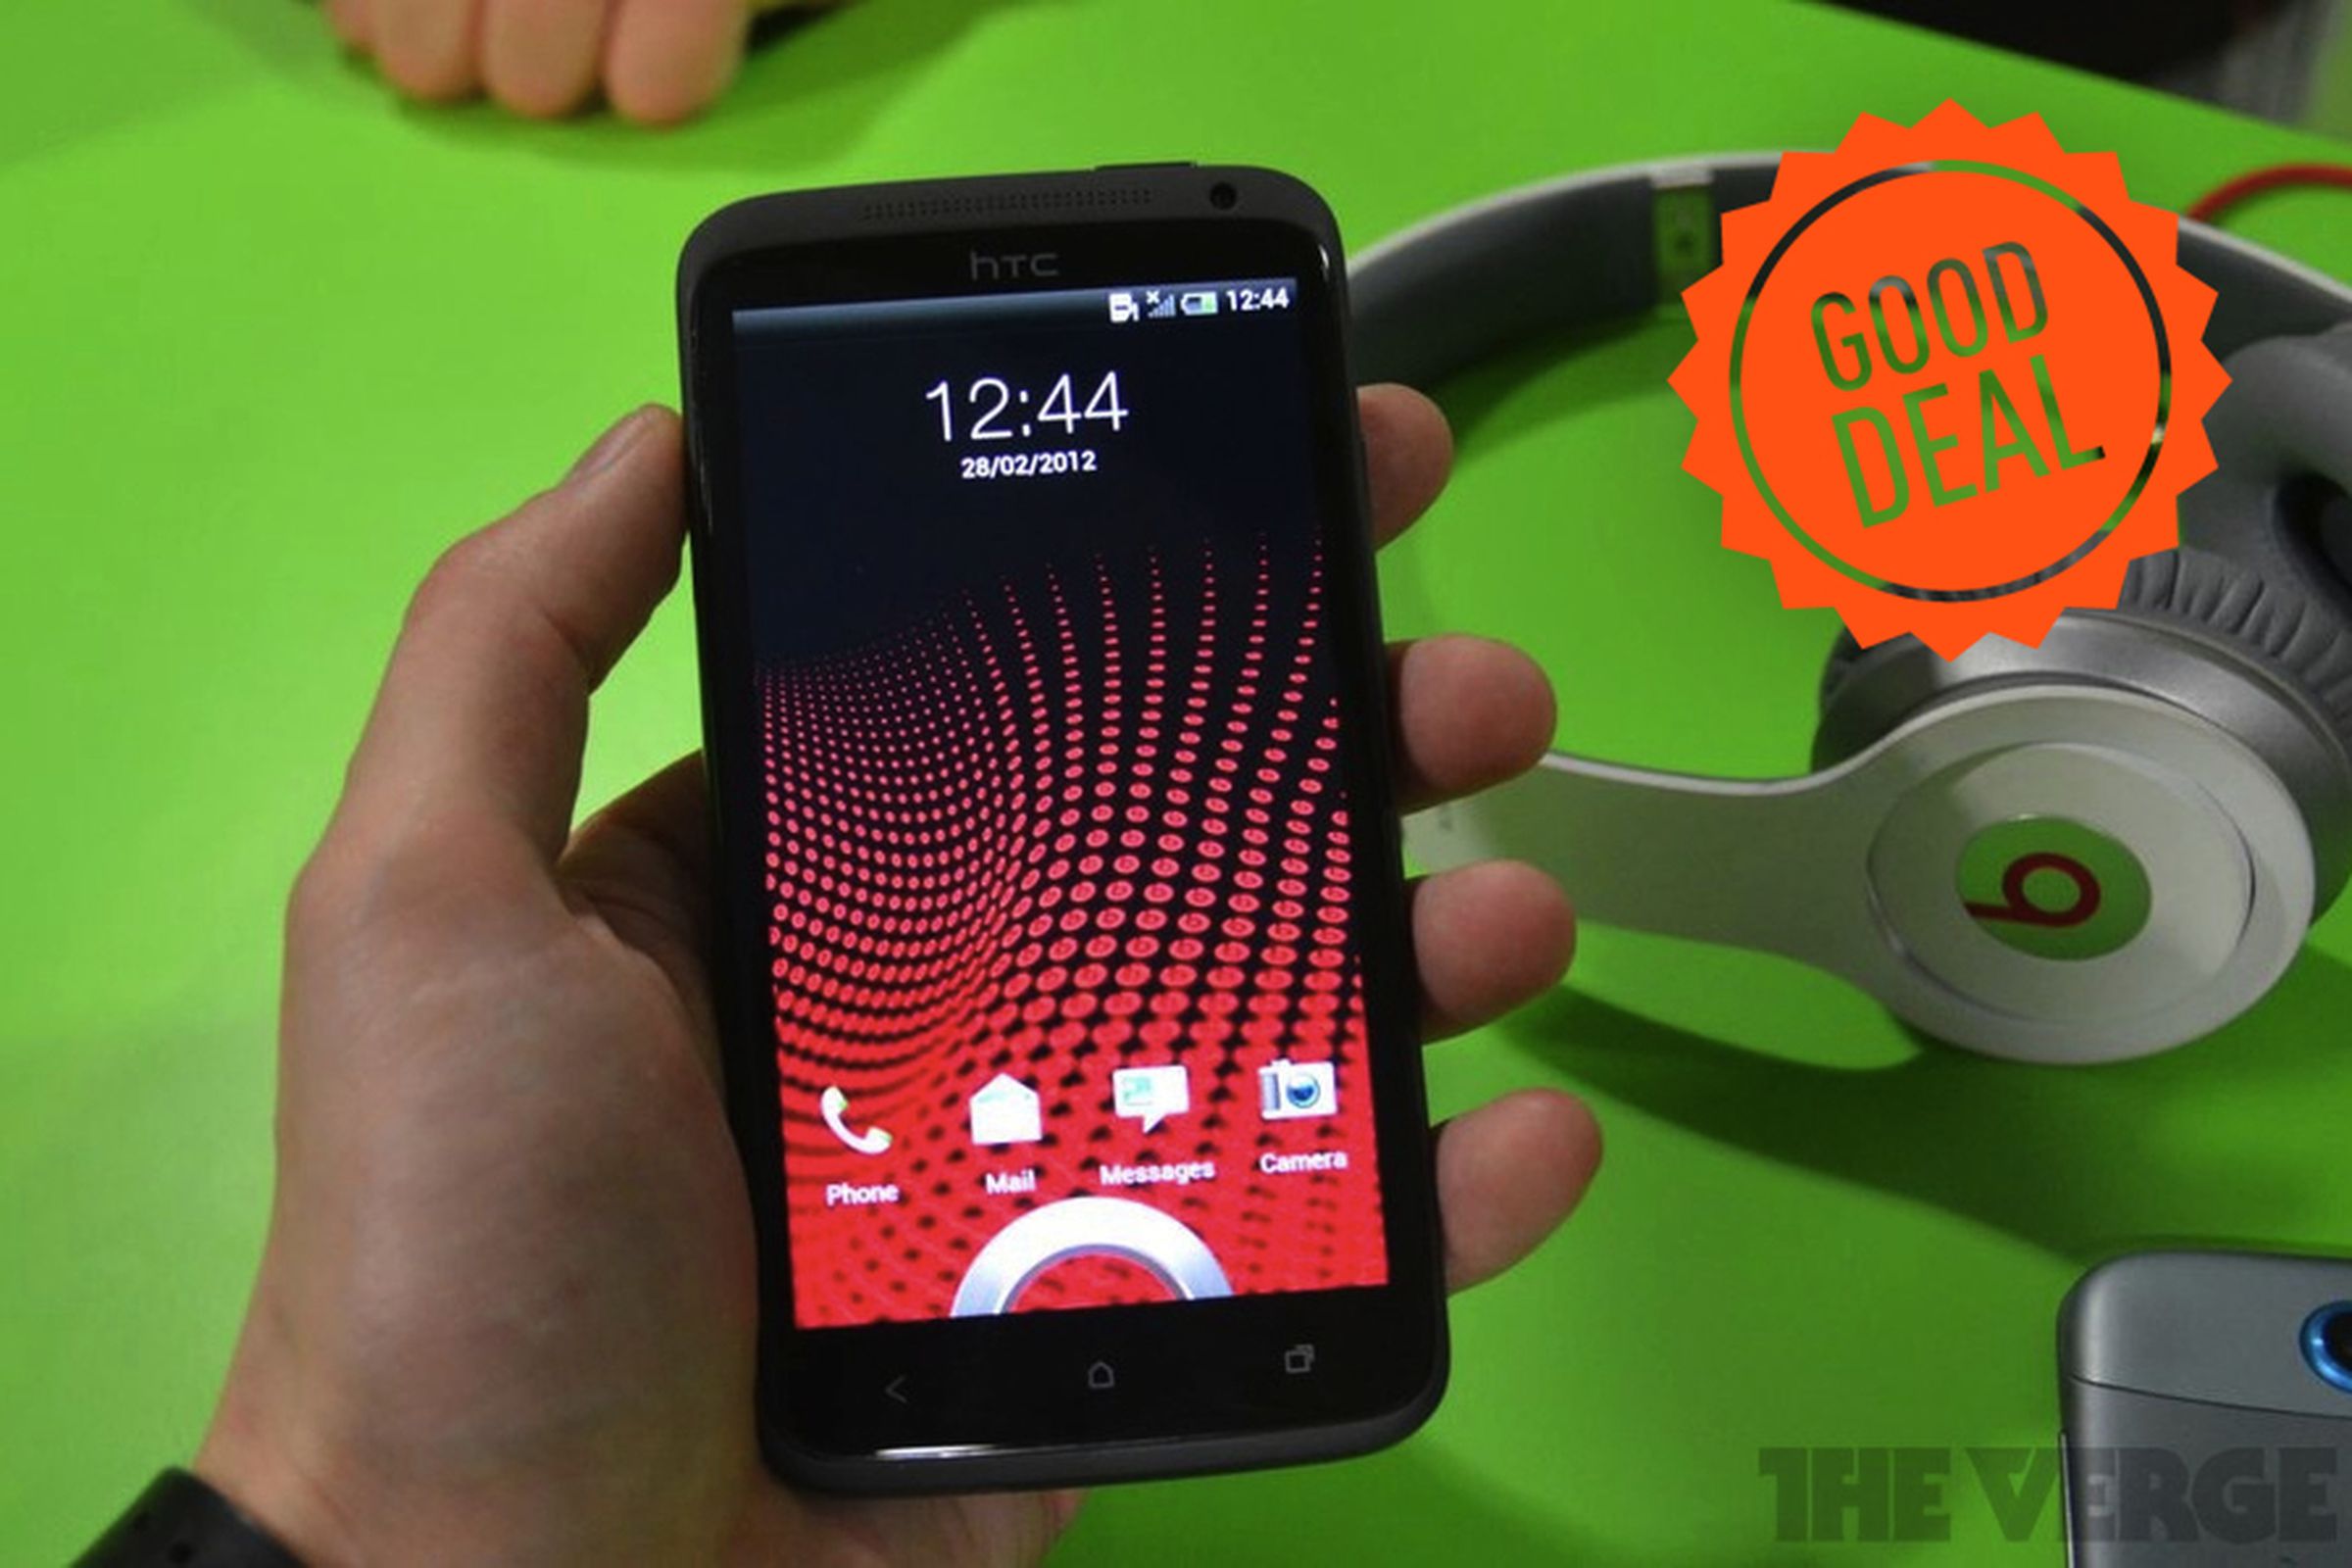 htc one x good deal